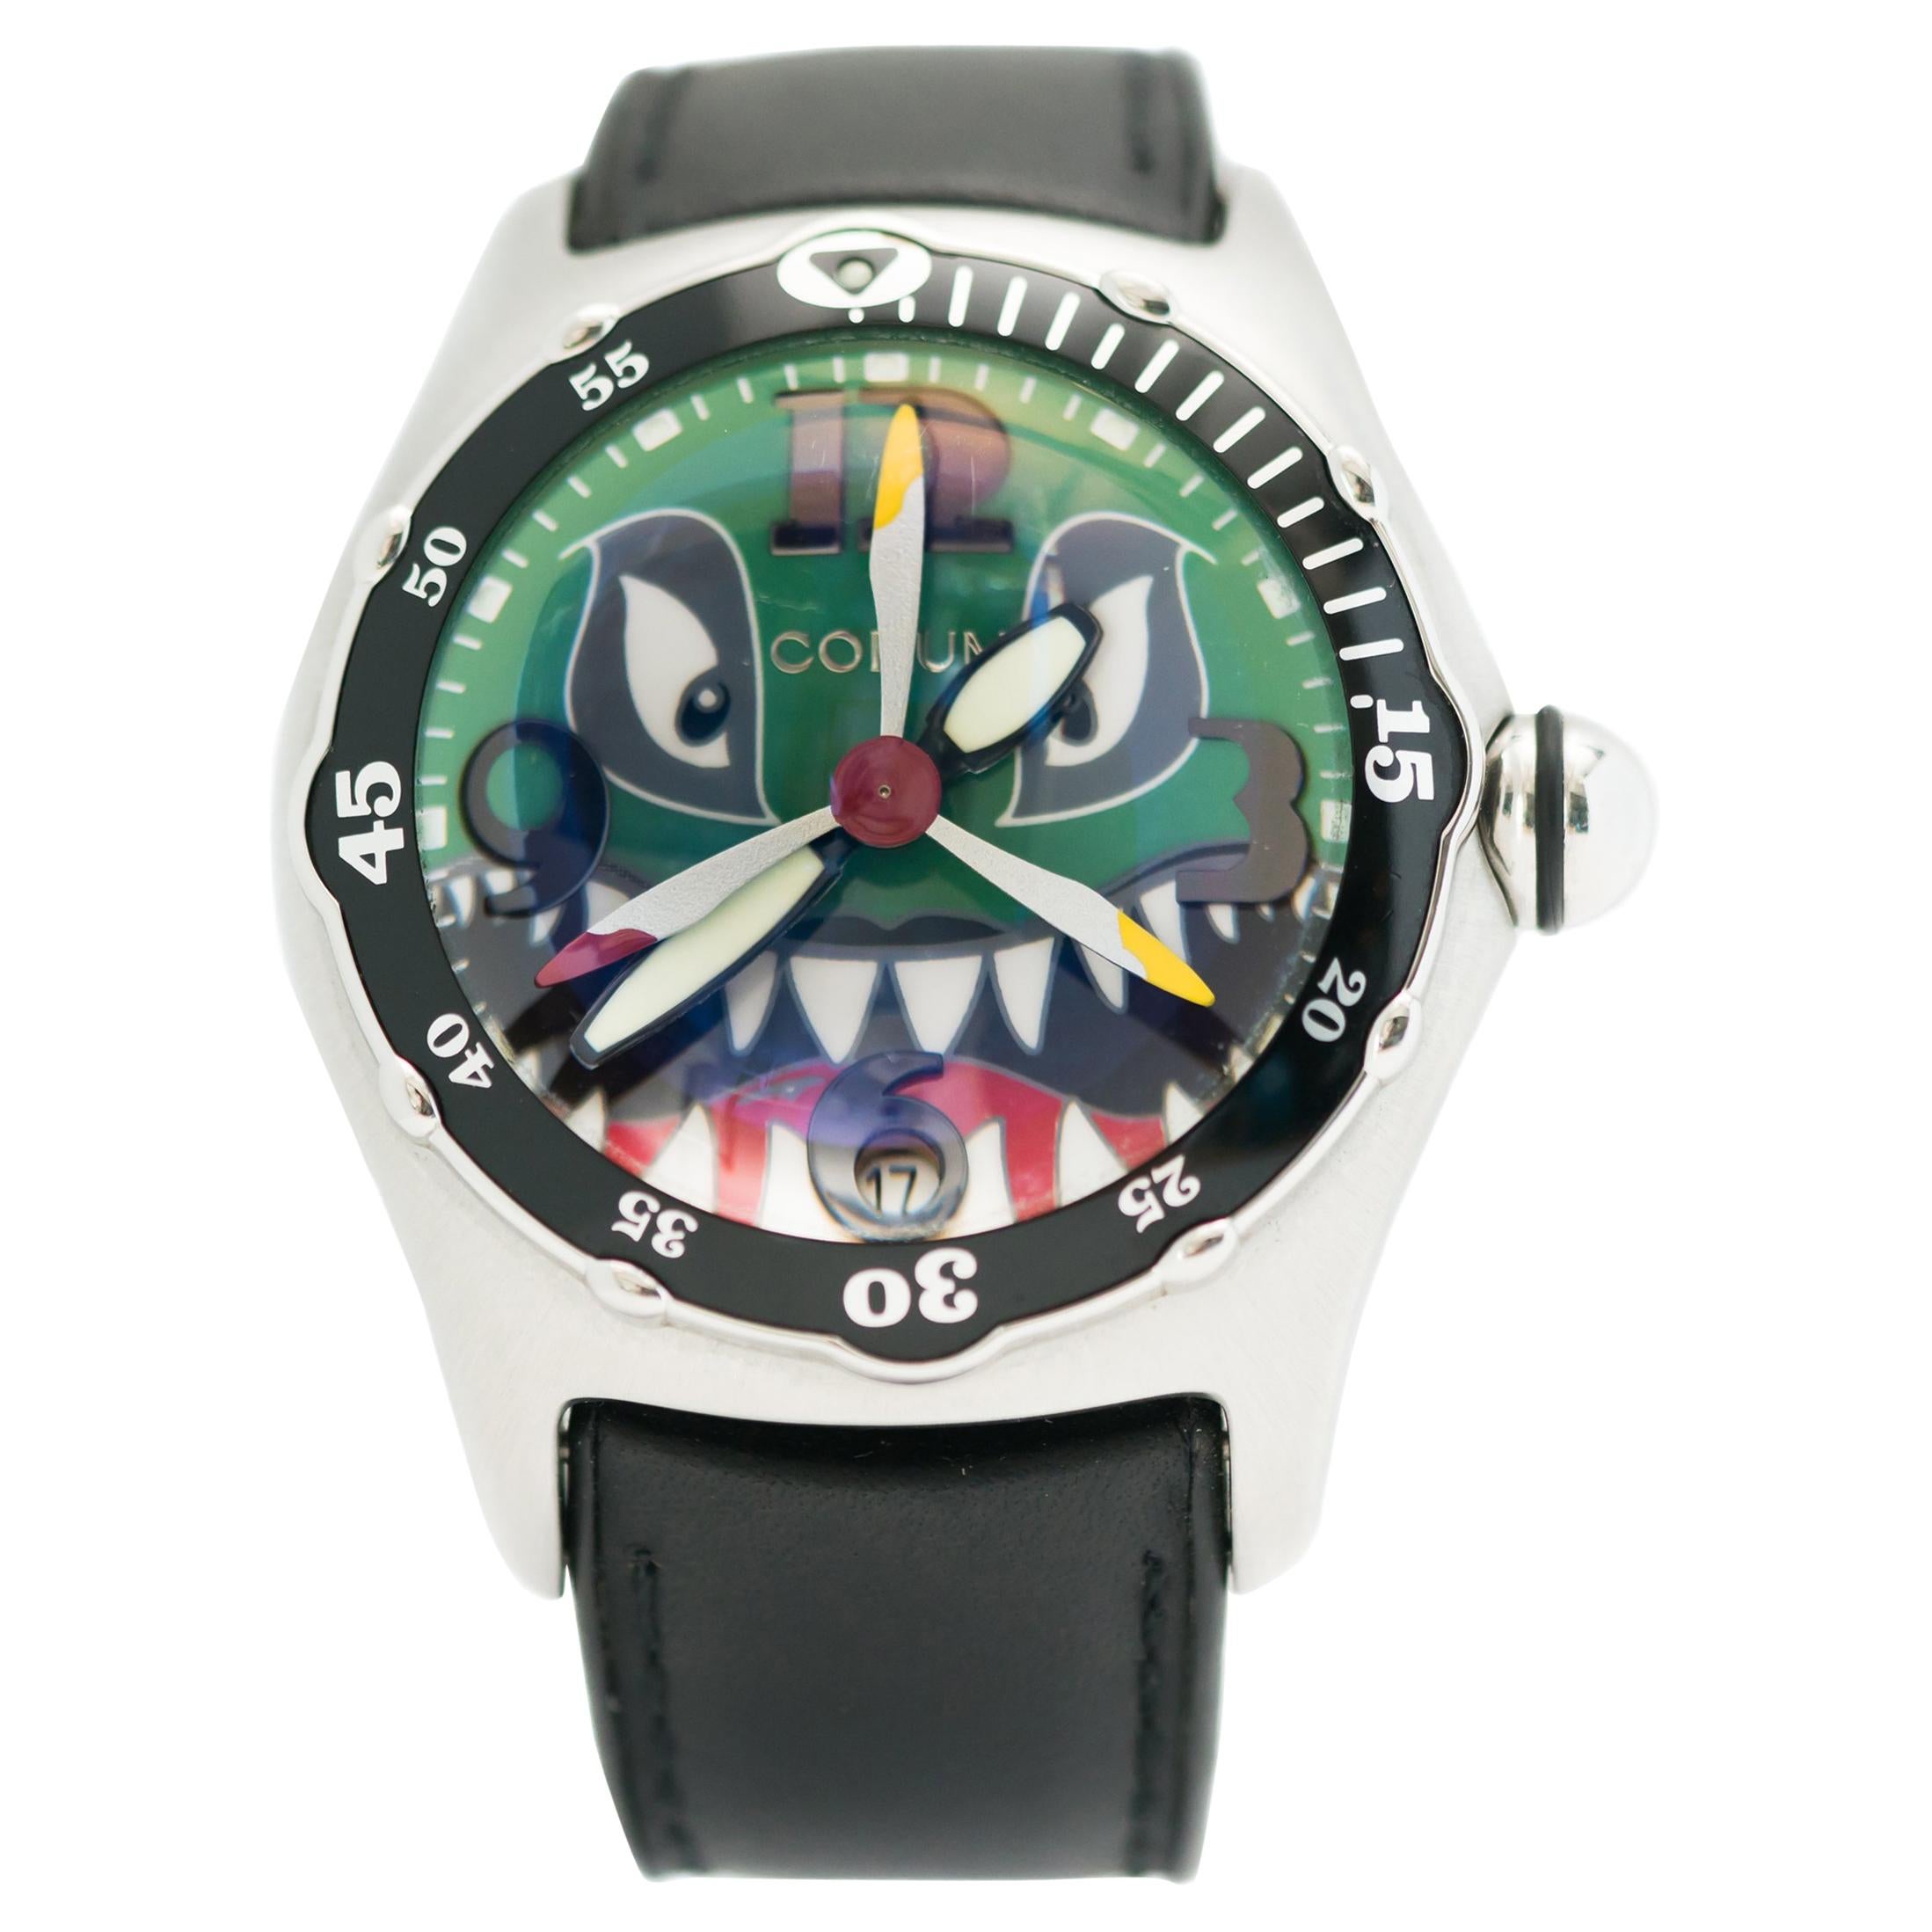 2004 Corum Bubble Shark Dive Bomber Watch, Limited Edition Chronograph